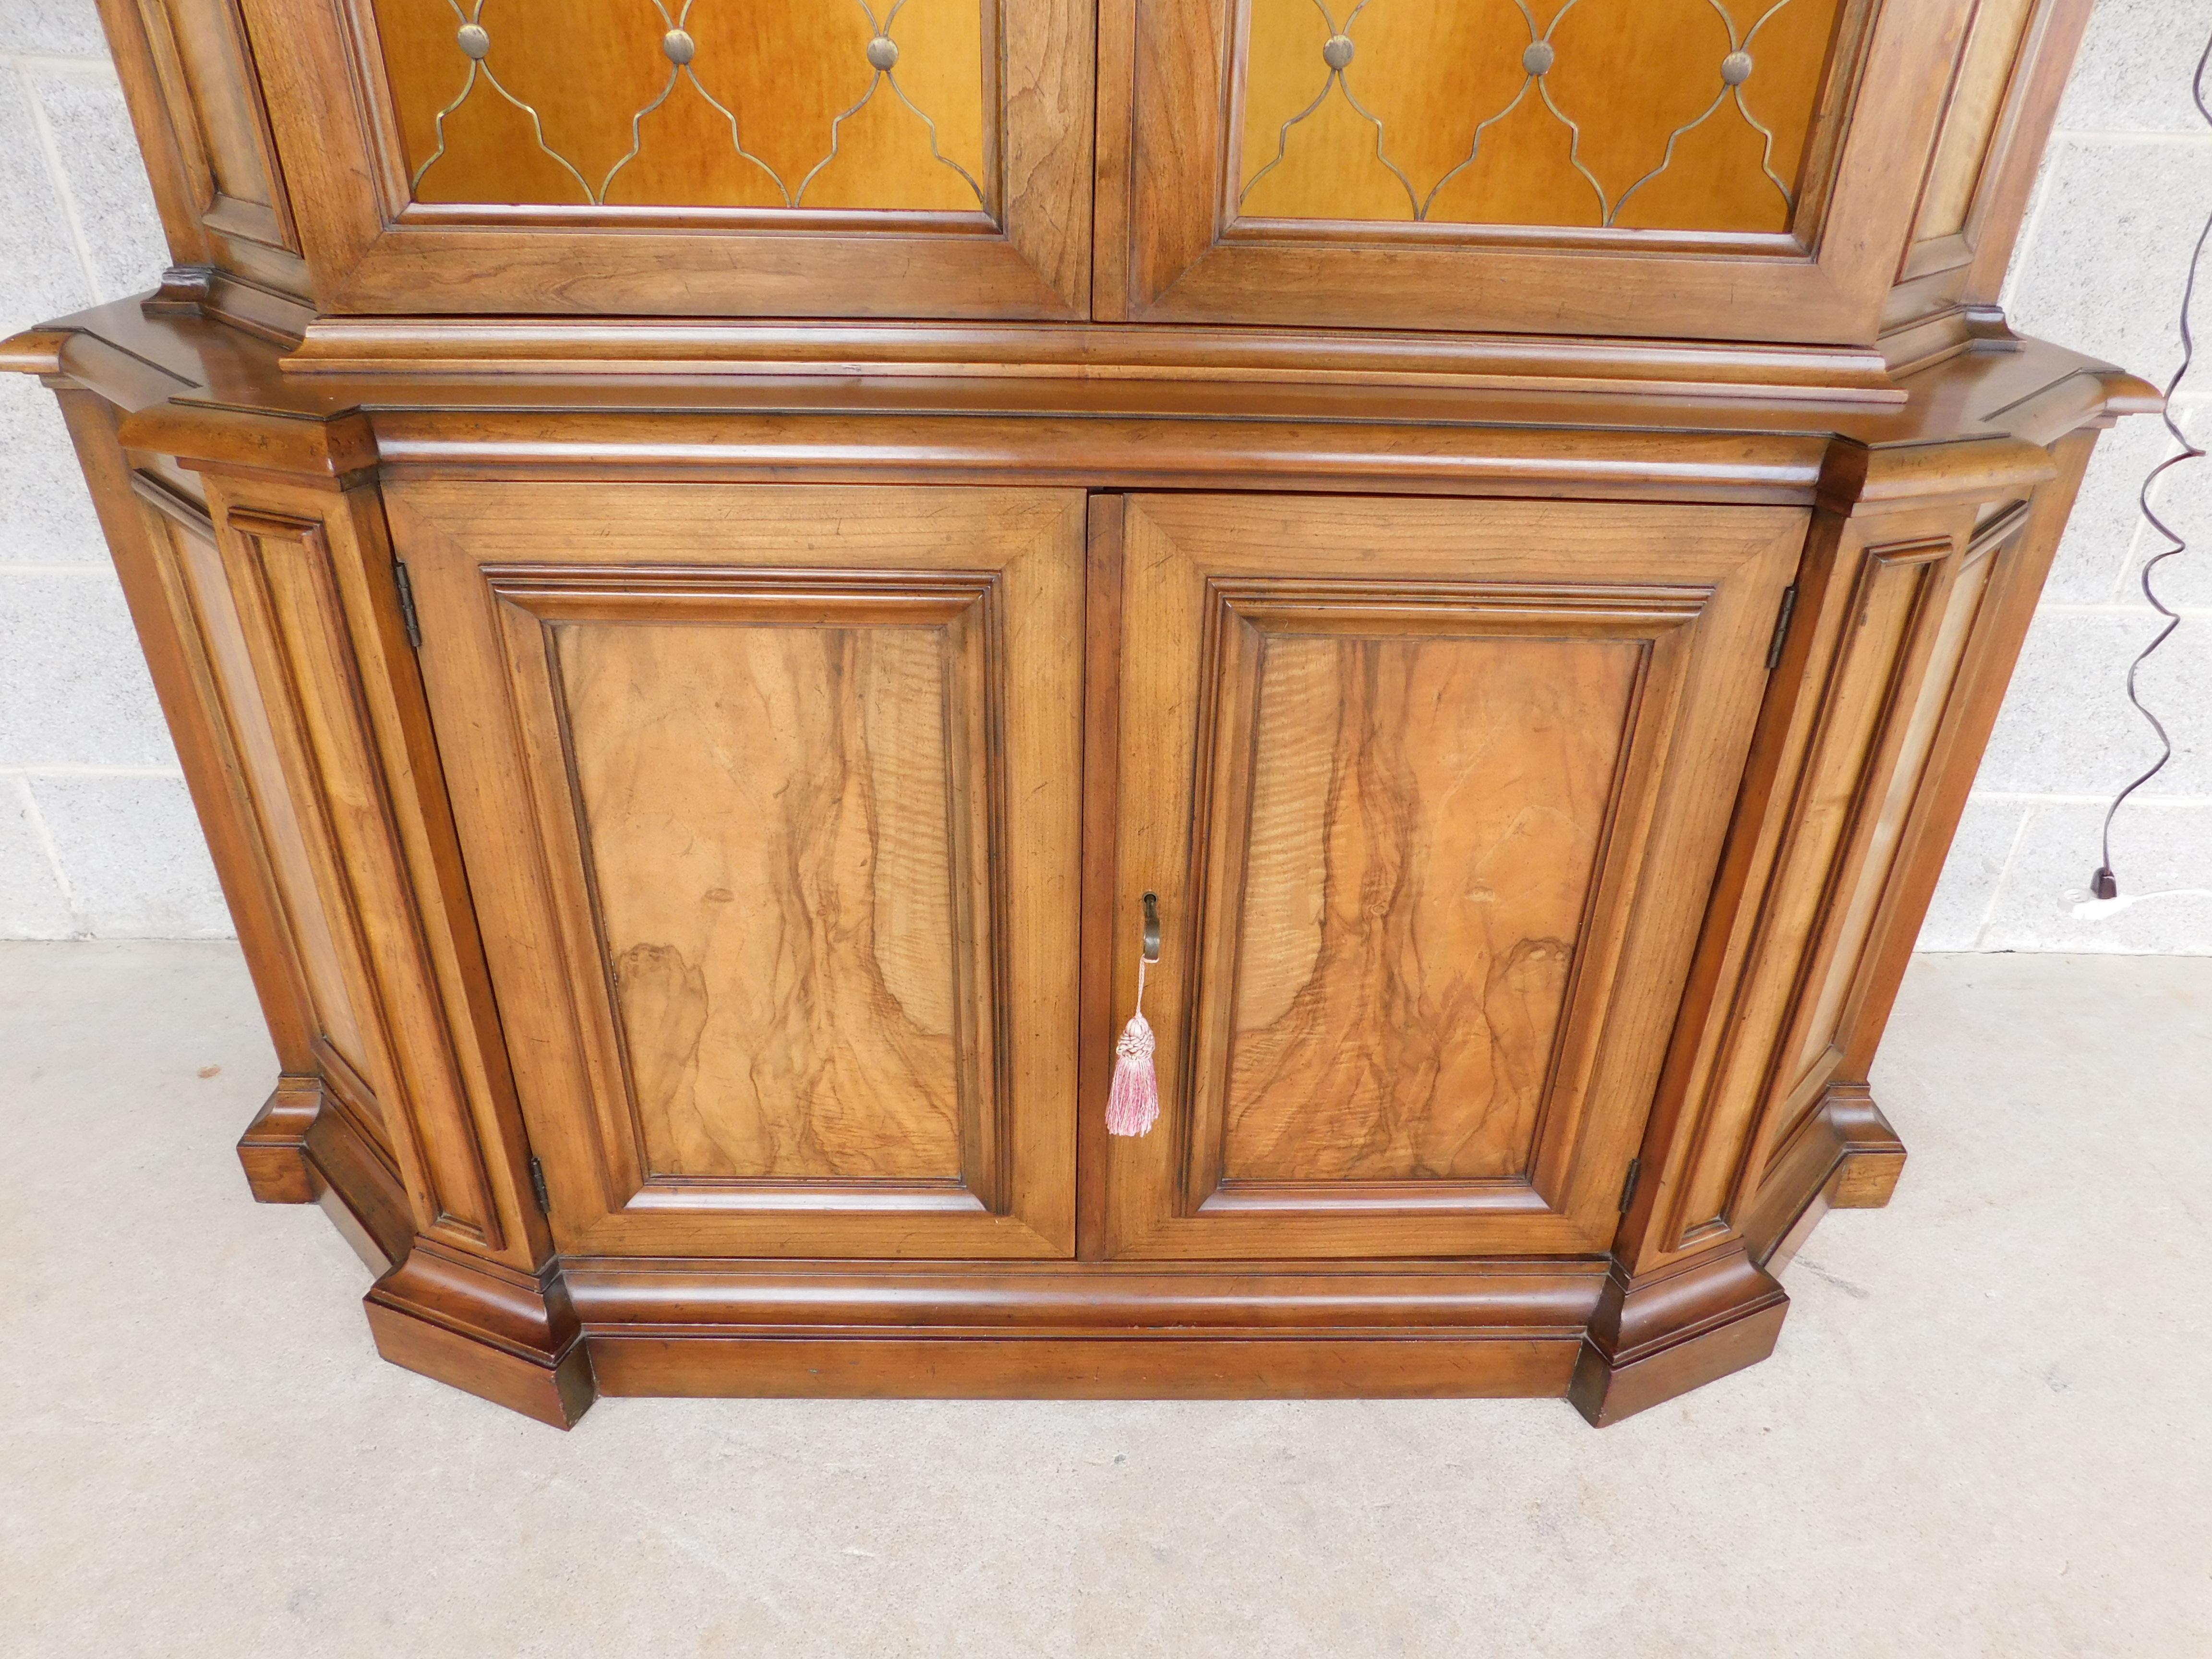 midcentury French Regency Style Baker Furniture lighted 1 piece display cabinet. French and Dutch influence, Arched Top Center Molding. Stepped Columns with Rosewood Accents. Brass Trellis Pattern Doors, inside with Gold Velour Covered Surfaces.